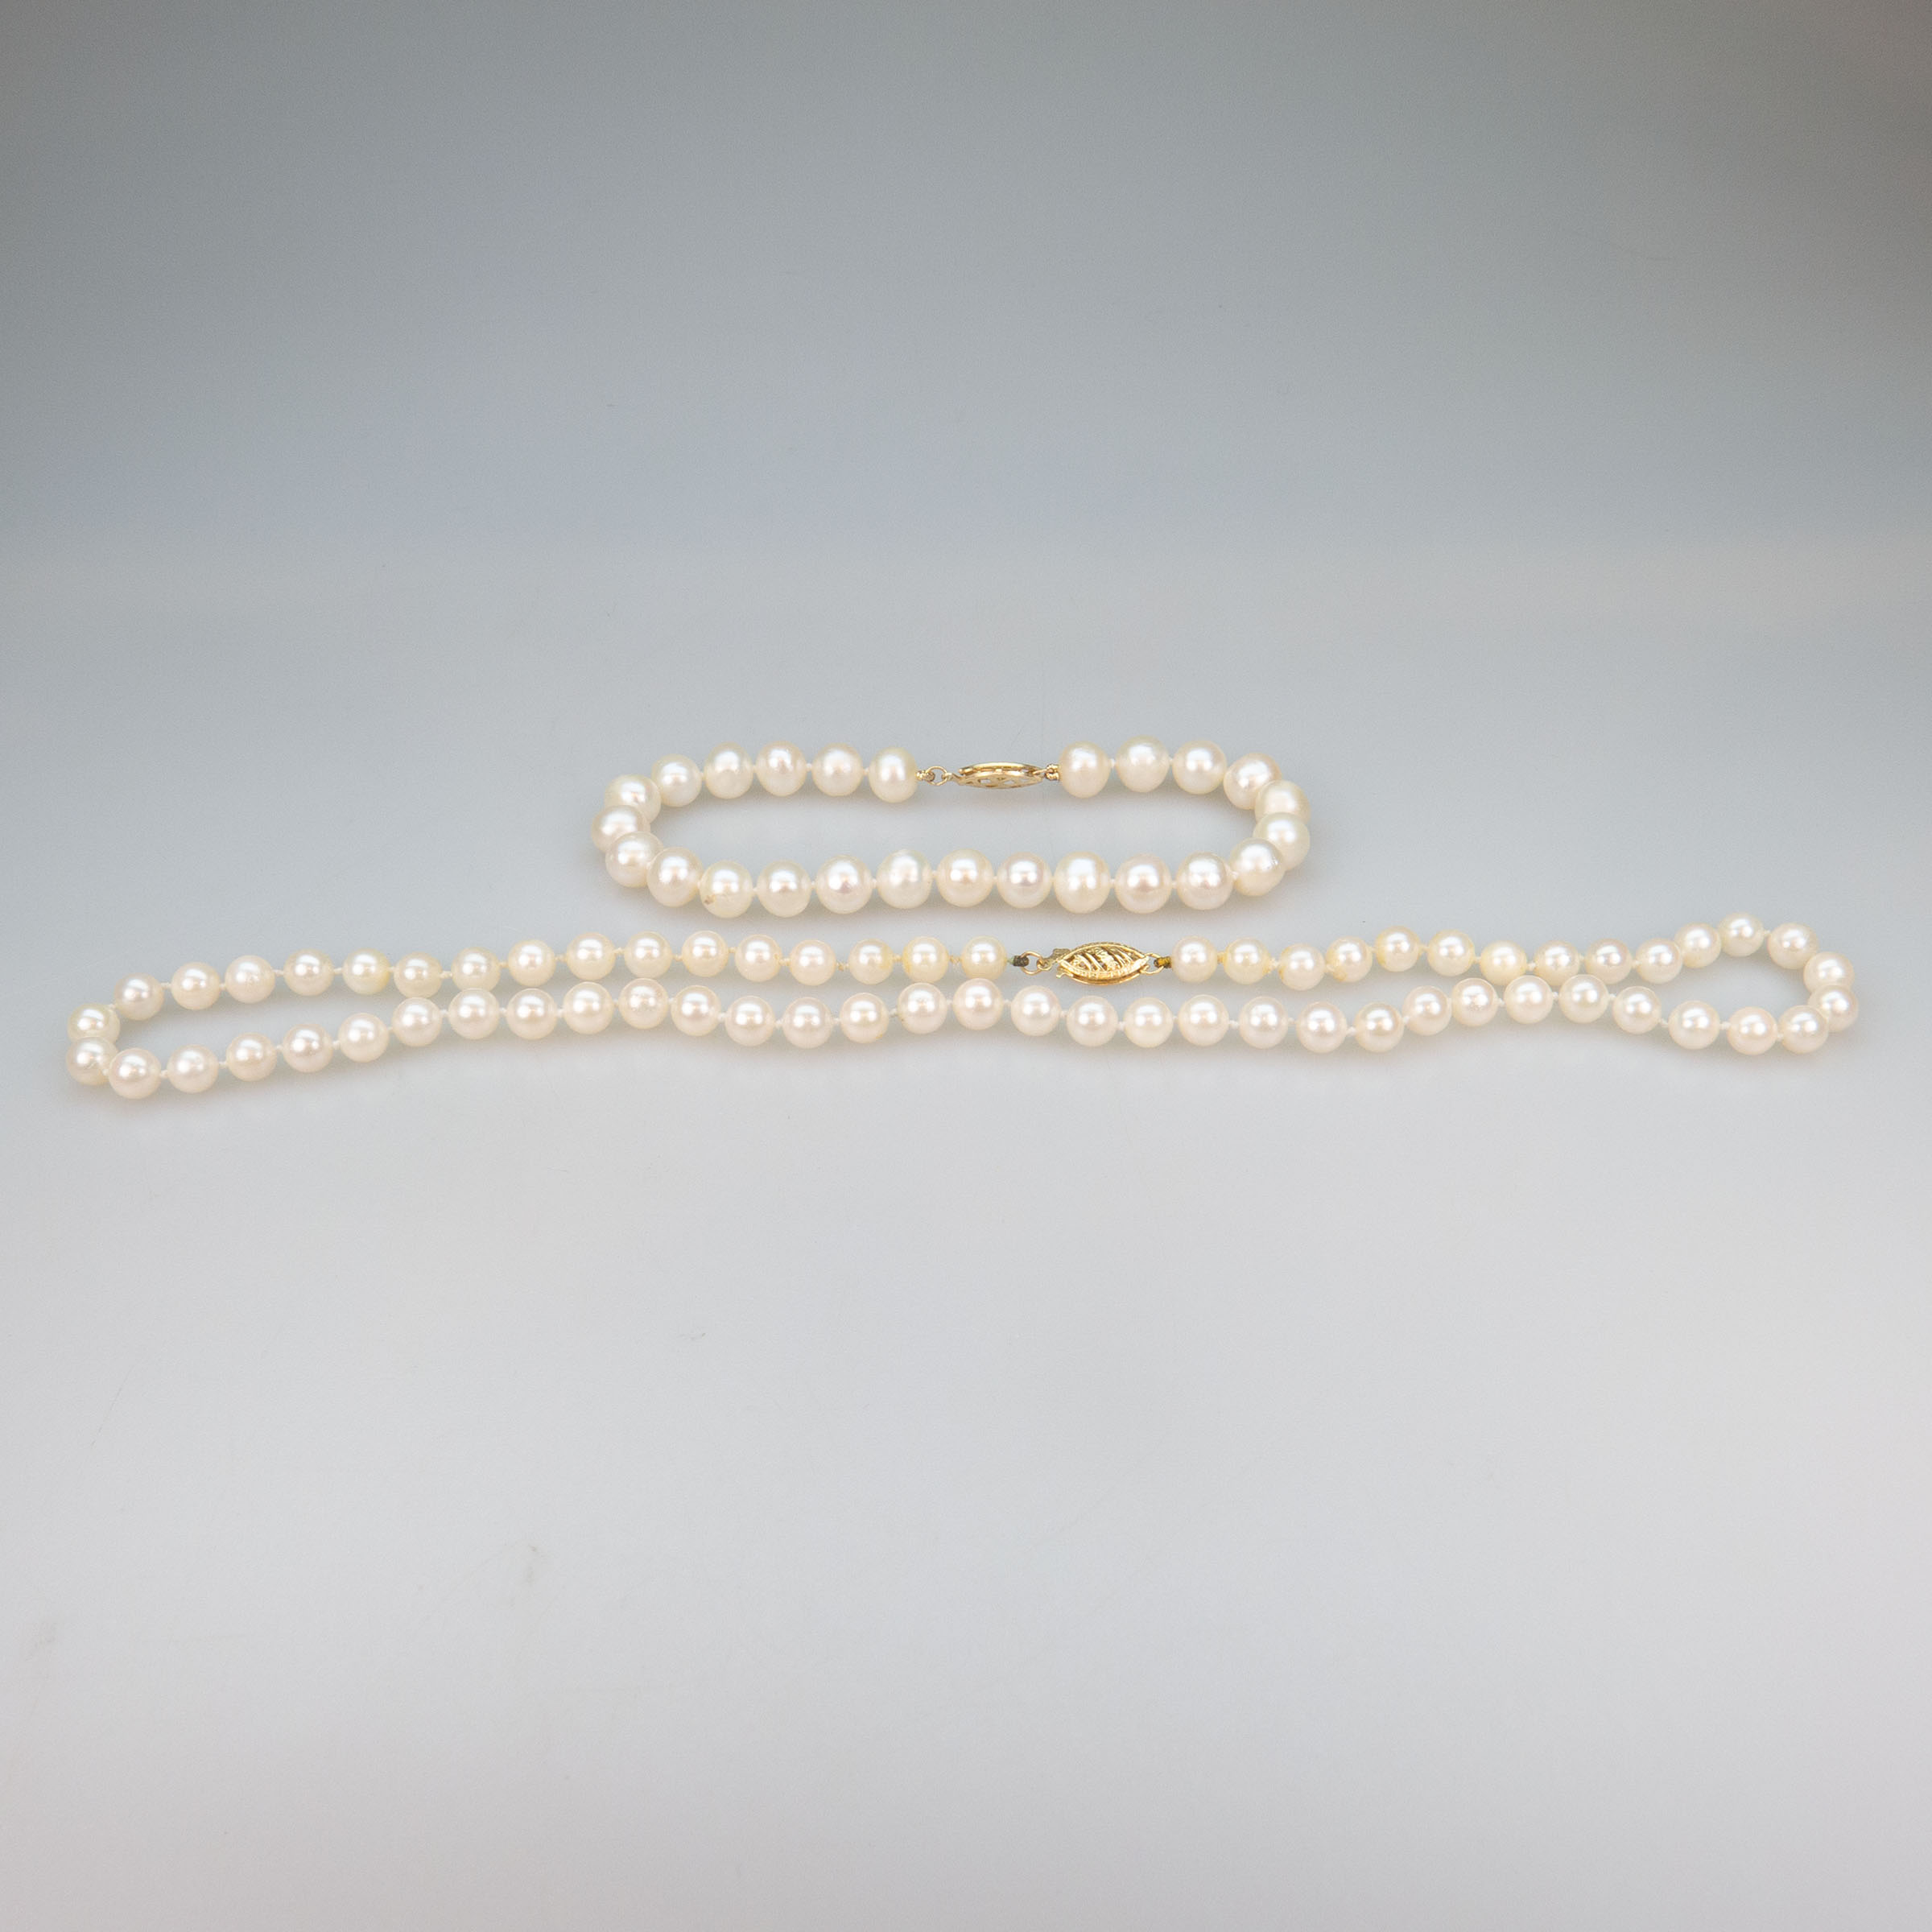 A Single Strand Of Cultured Pearls (5.5mm to 6.0mm) And A Freshwater Pearl Bracelet